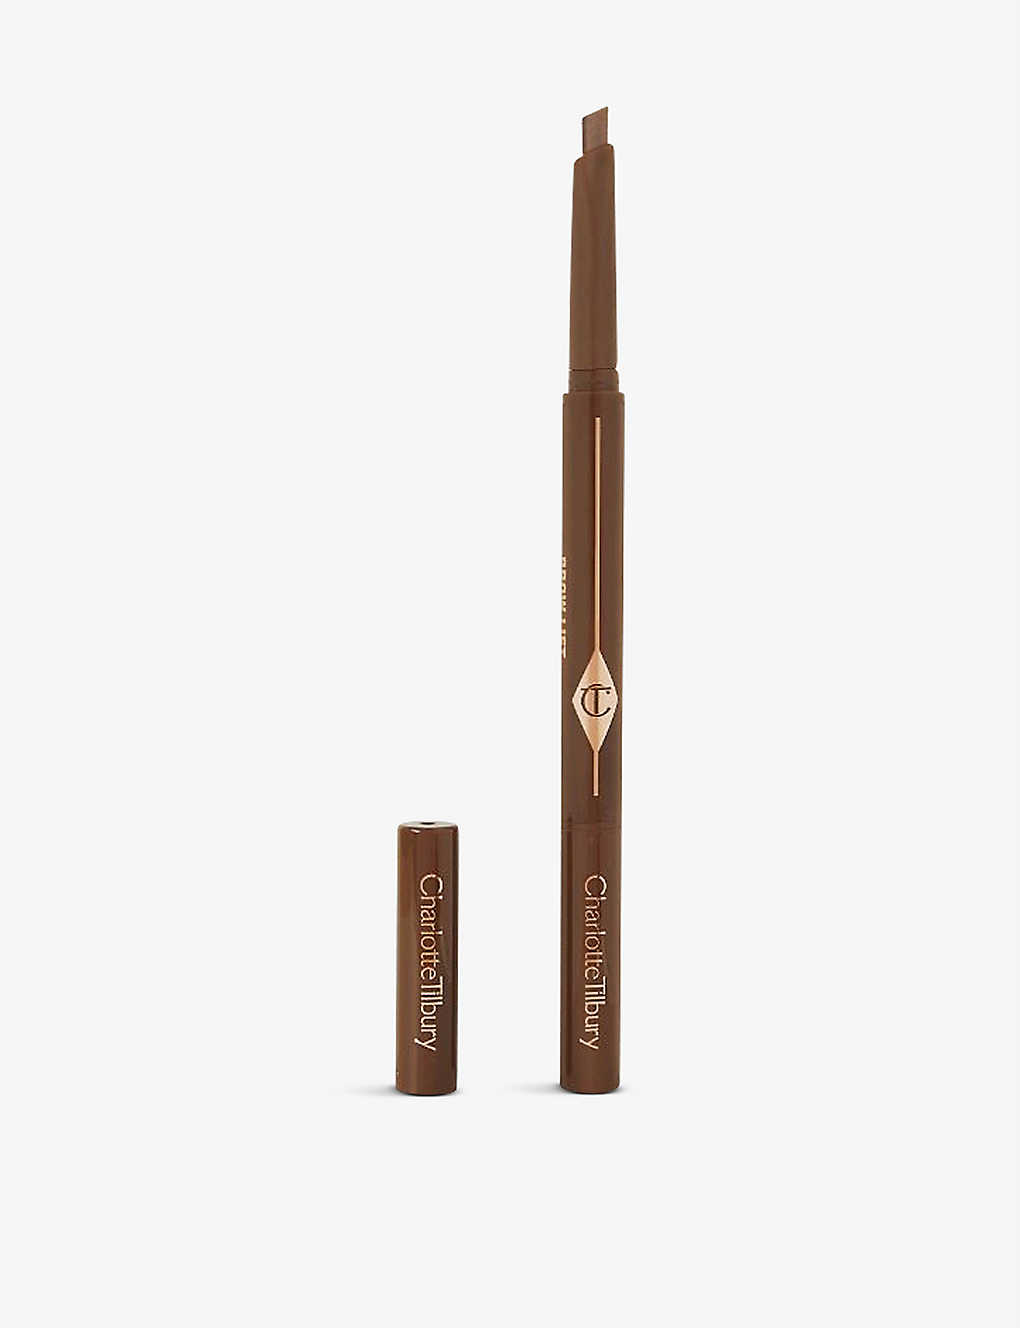 Charlotte Tilbury Brow Lift Eyebrow Pencil In Natural Brown